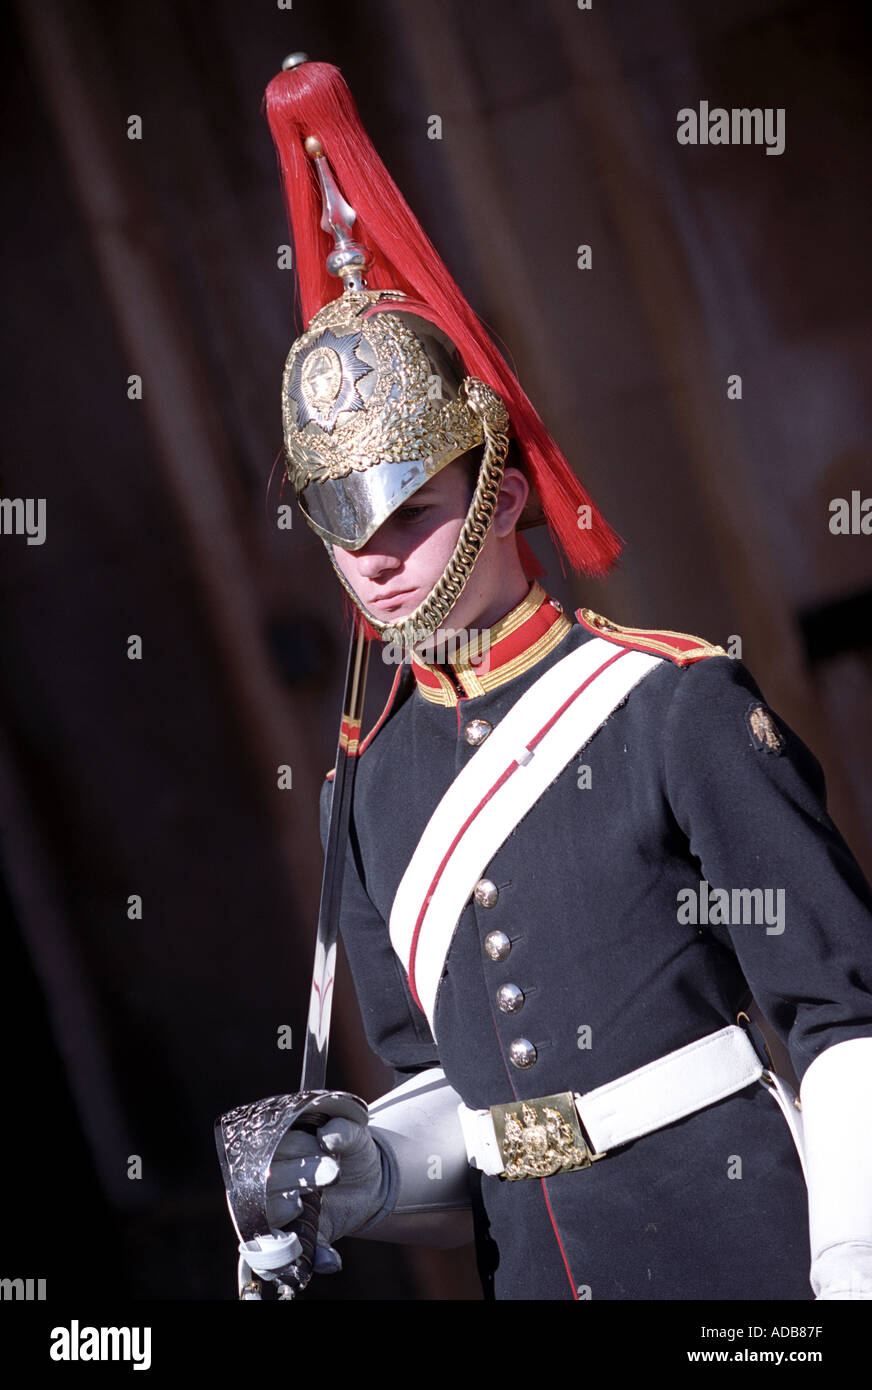 Soldier on duty at Horse Guards Parade in London Britain UK Stock Photo